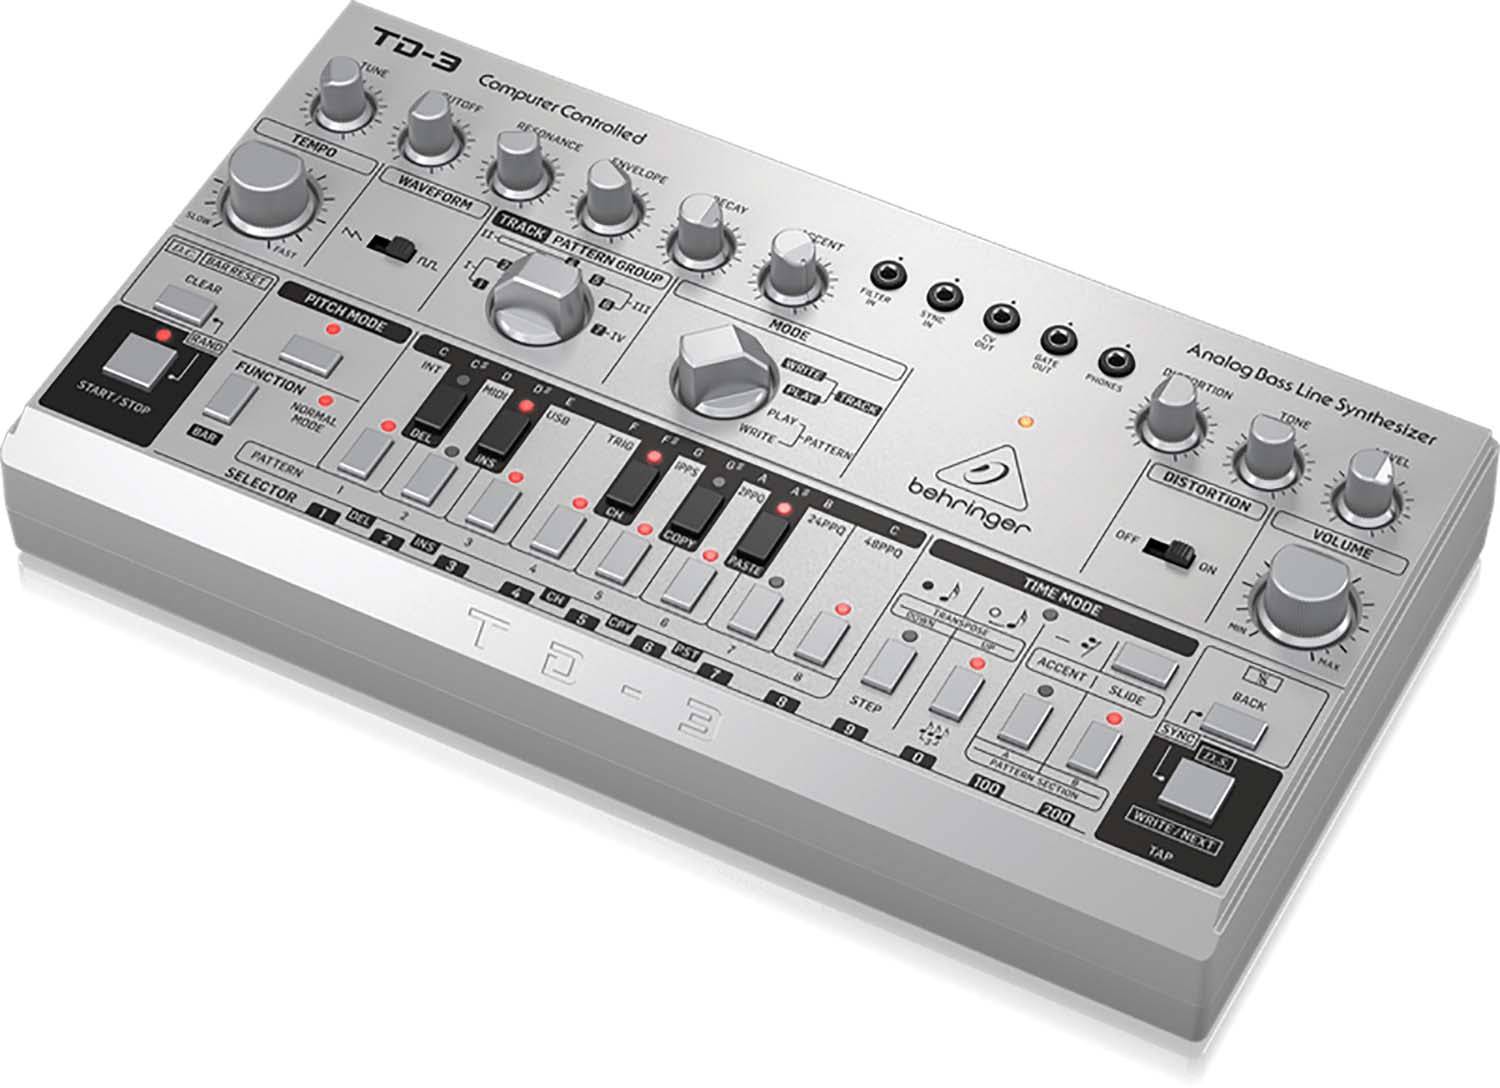 Behringer TD-3-SR Analog Bass Line Synthesizer With VCO, VCF And 16-Step Sequencer - Silver - Hollywood DJ